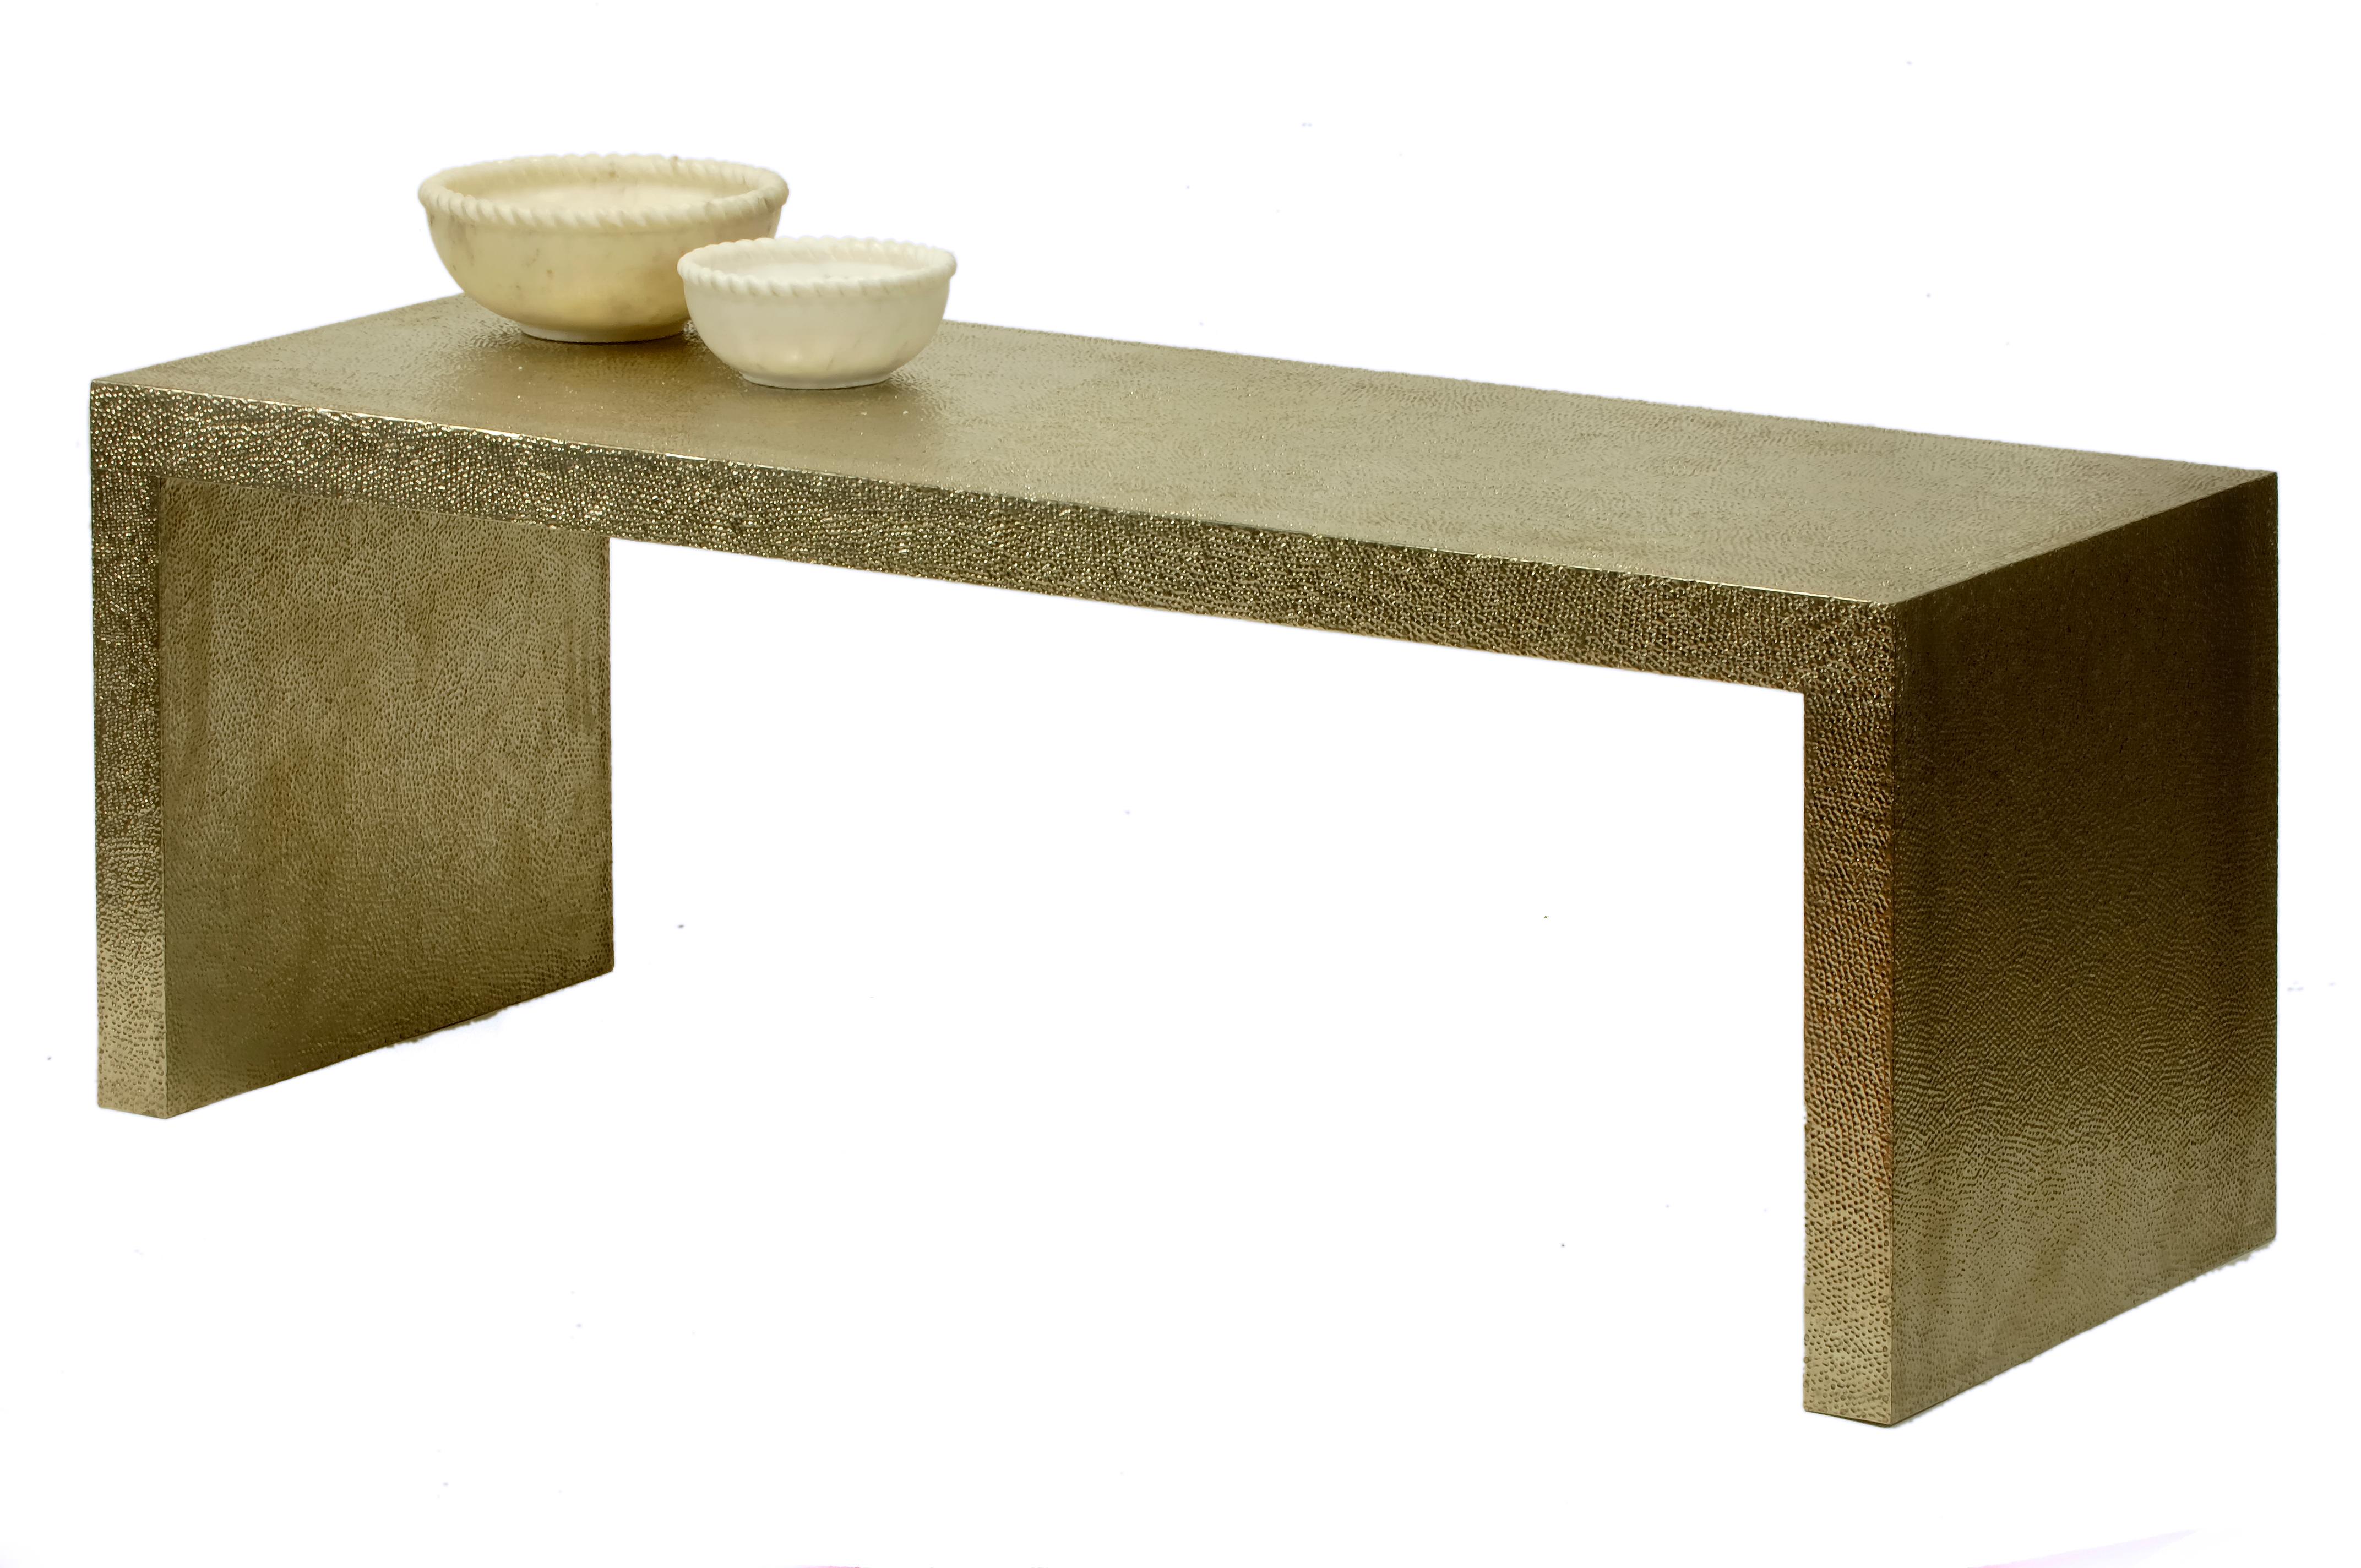 Indian Low Rectangular Table in White Bronze Clad Over MDF by Stephanie Odegard For Sale